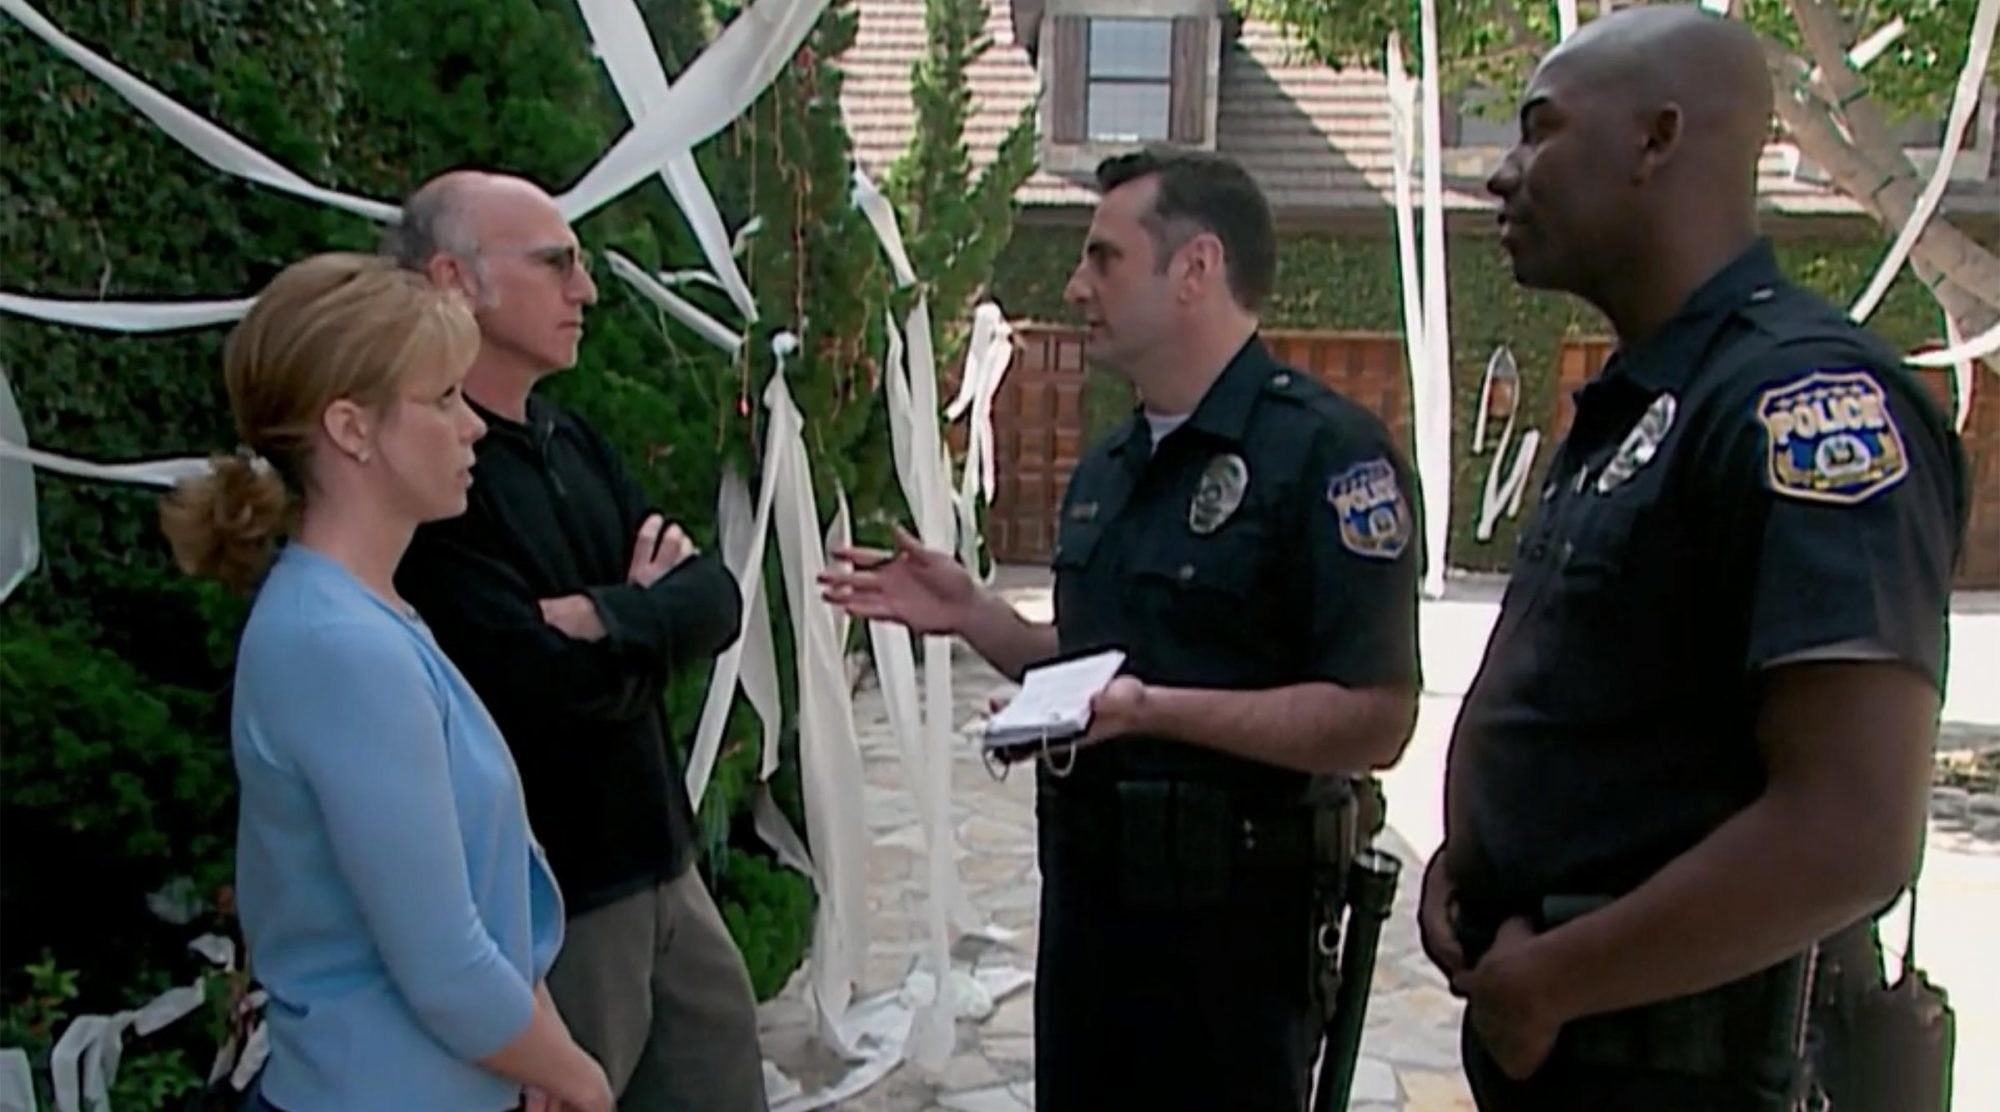 Cheryl and Larry talking to police officers